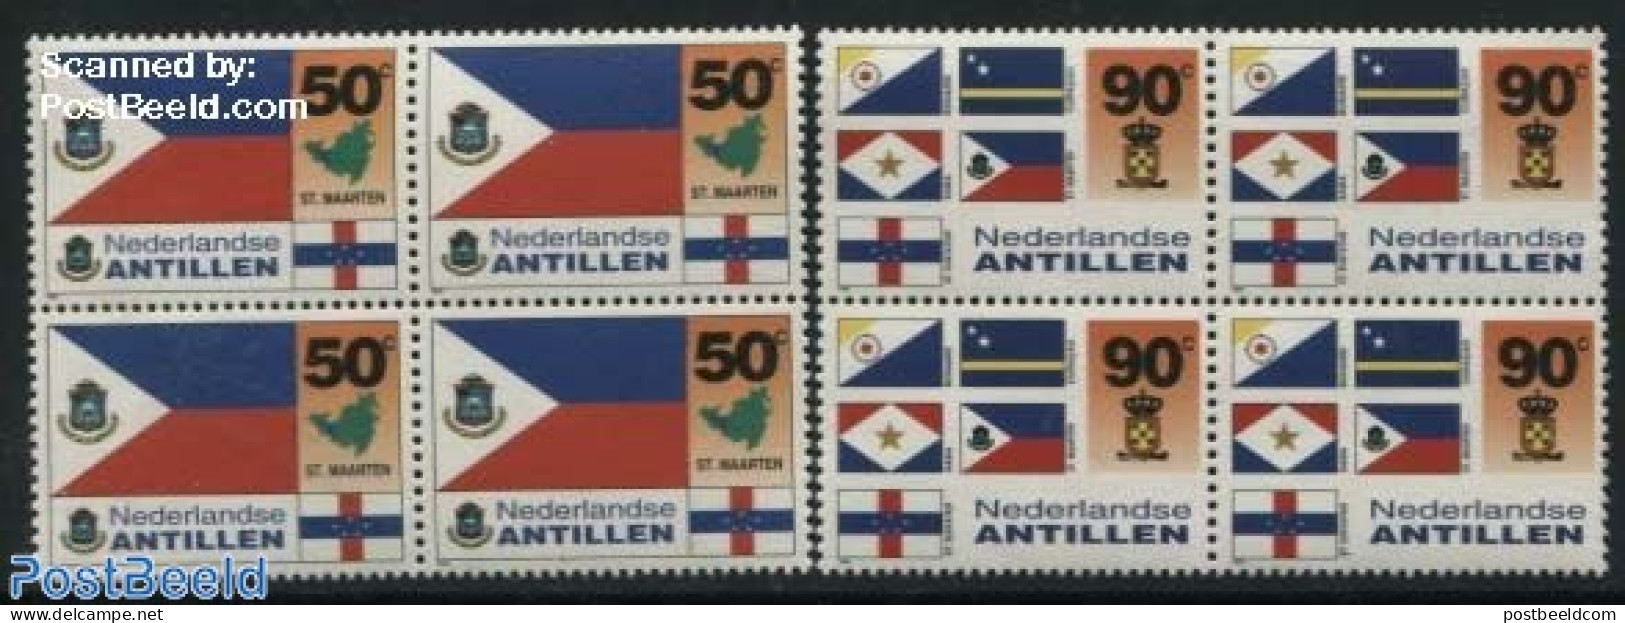 Netherlands Antilles 1995 Flags 2v, Red/blue In St Martin Flag Exchanged, Blocks Of 4, Mint NH, History - Various - Fl.. - Oddities On Stamps